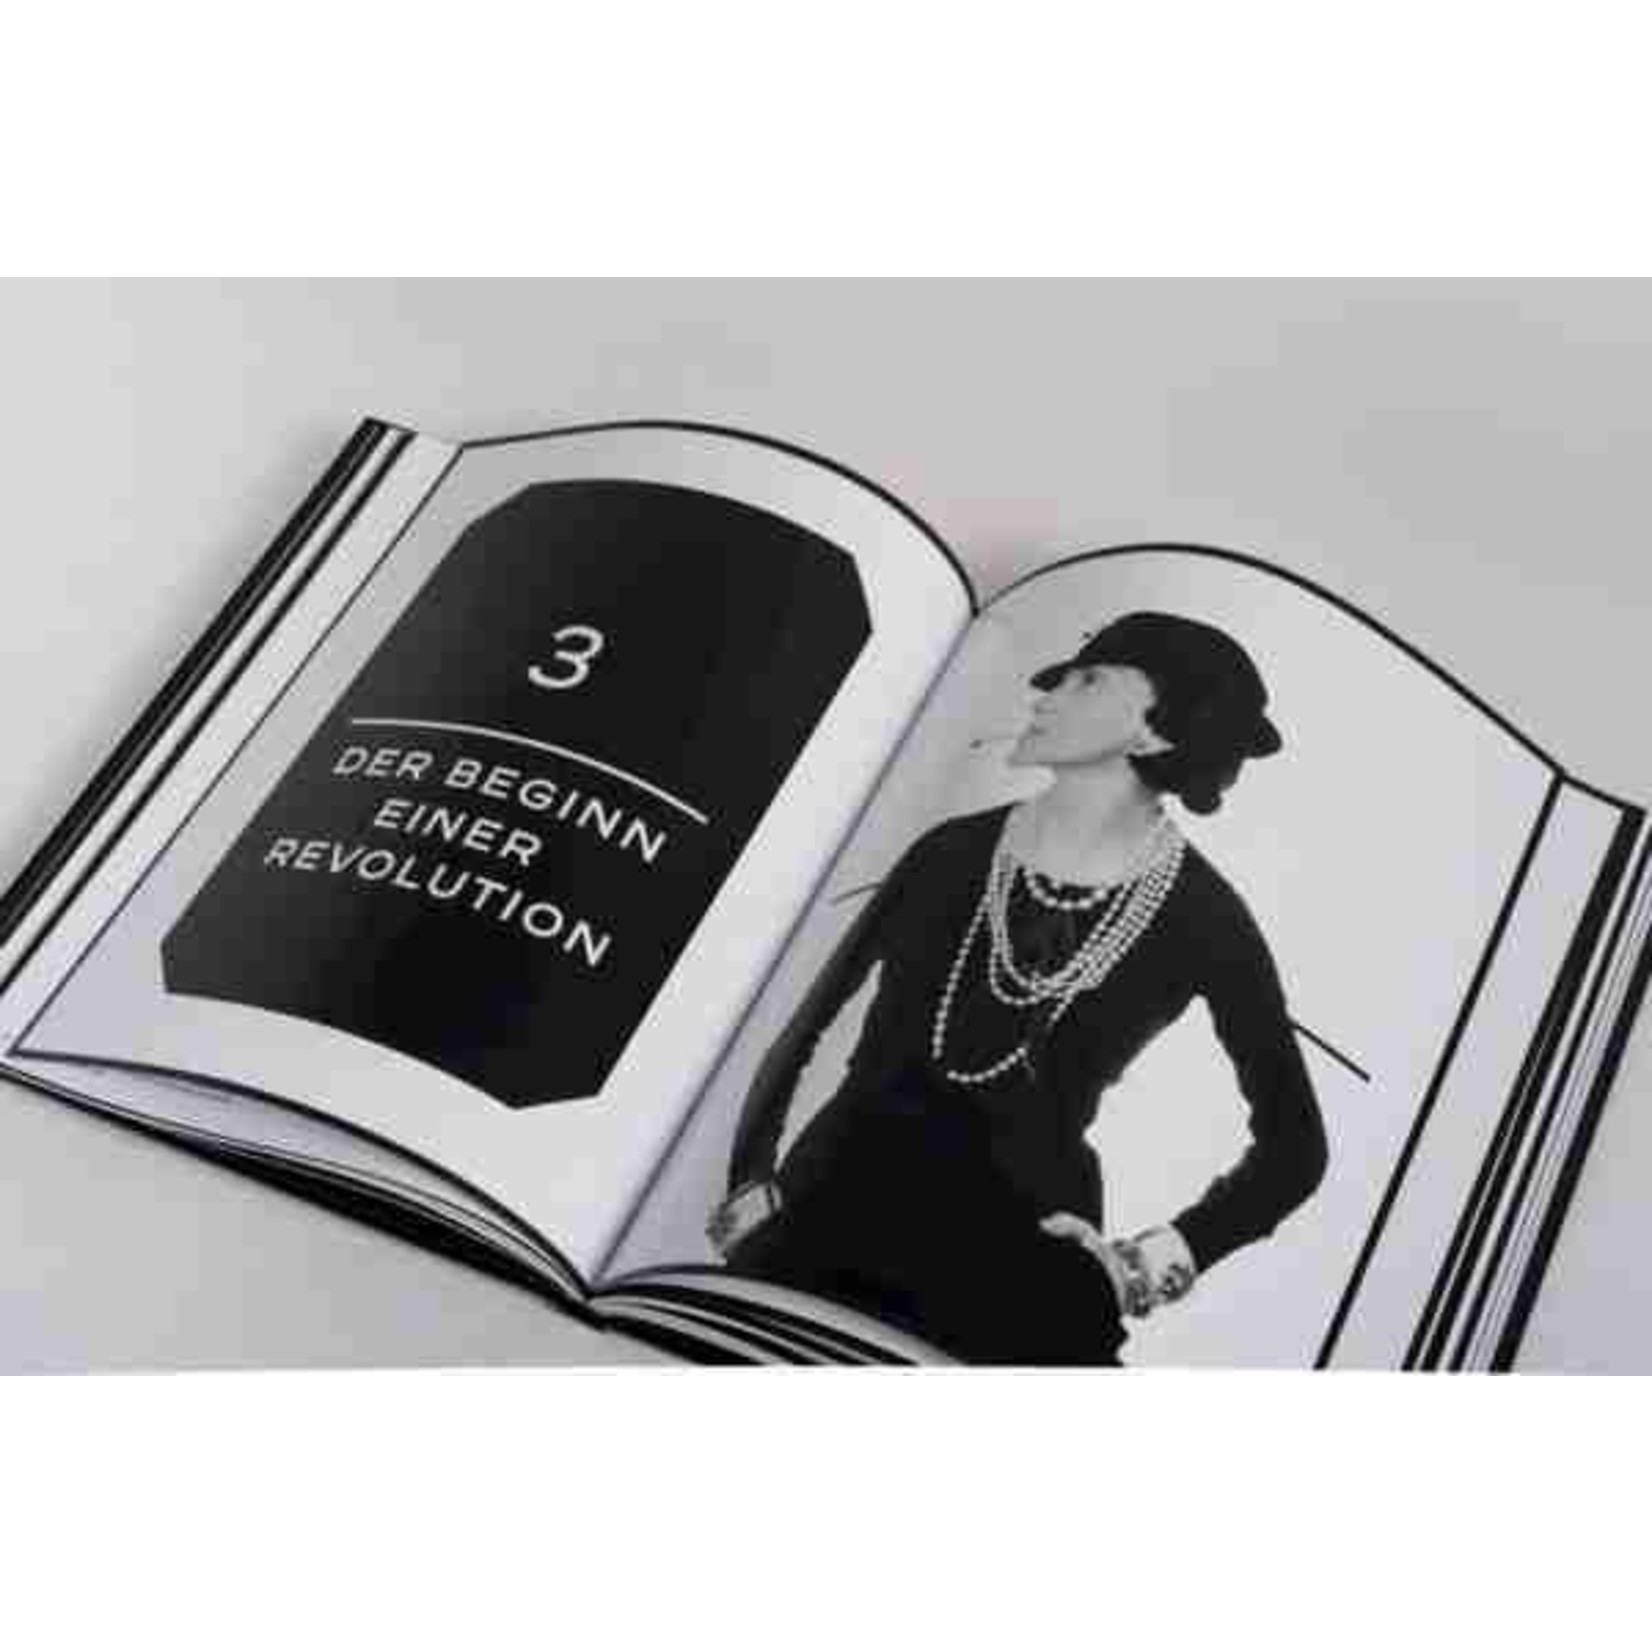 Chanel No. 5 Hardcover Coffee Table Book (Set of 2)